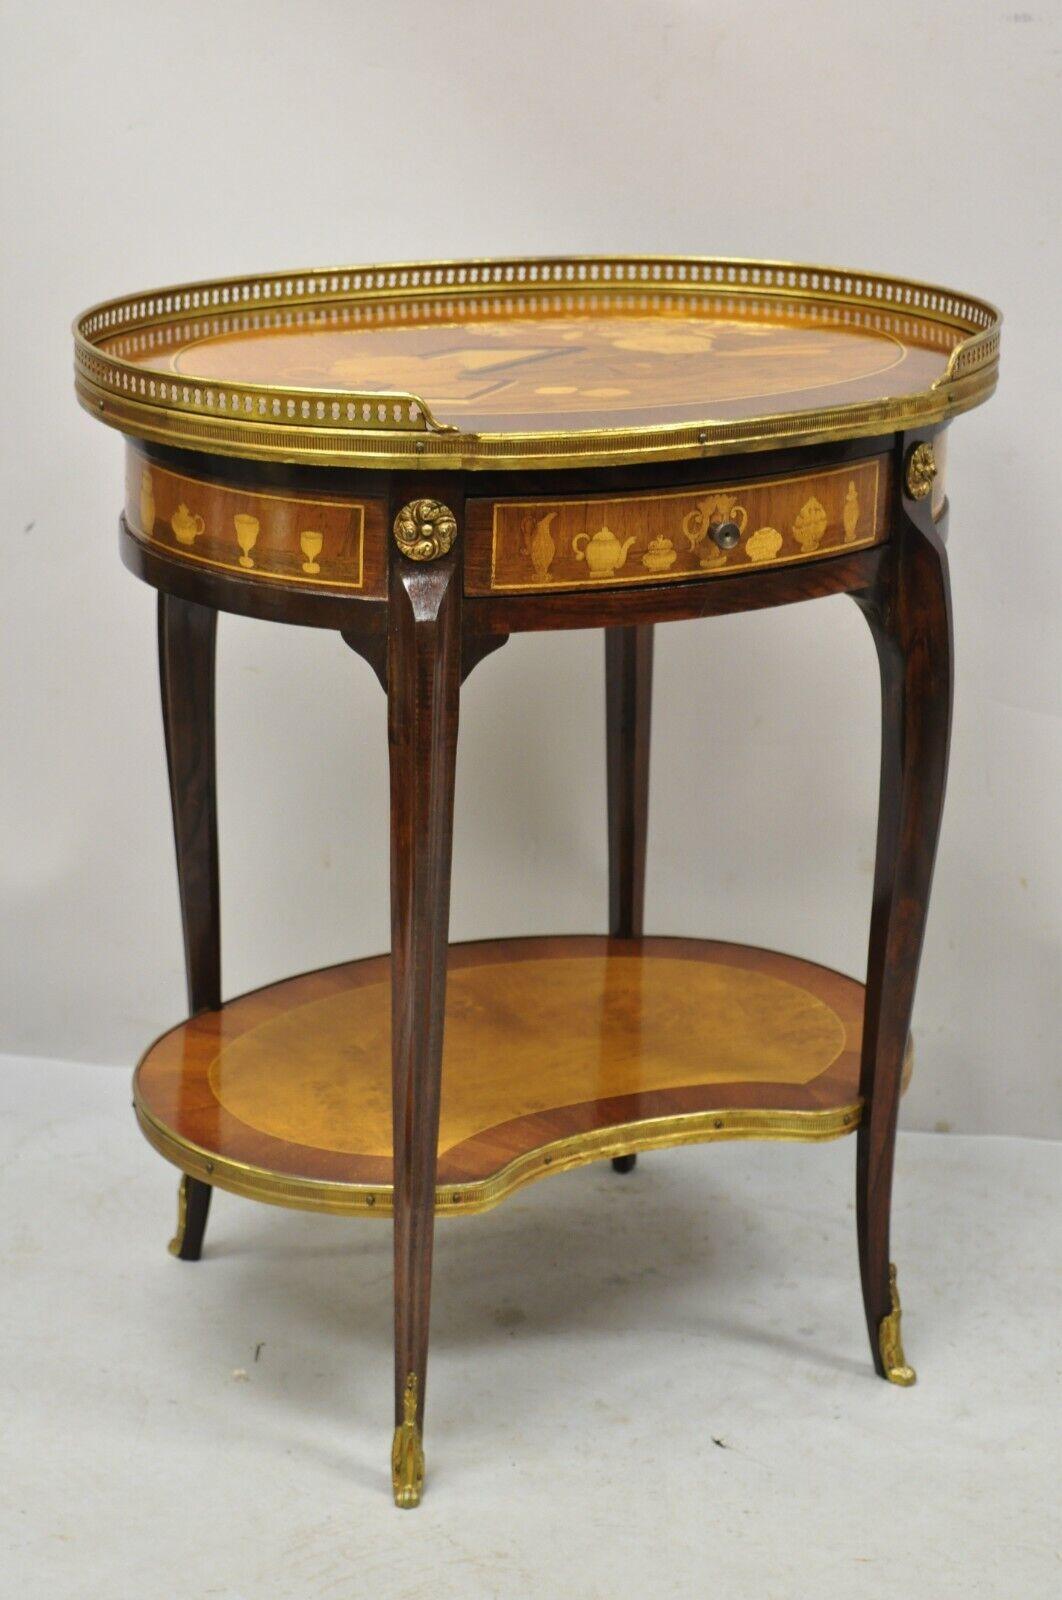 French Louis XV Style Marquetry Inlay Bronze Ormolu Accent Side Table. Item features marquetry inlay of still life scene to top, brass gallery, brass ormolu, lower shelf, 1 drawer, very nice vintage item, quality craftsmanship, great style and form.